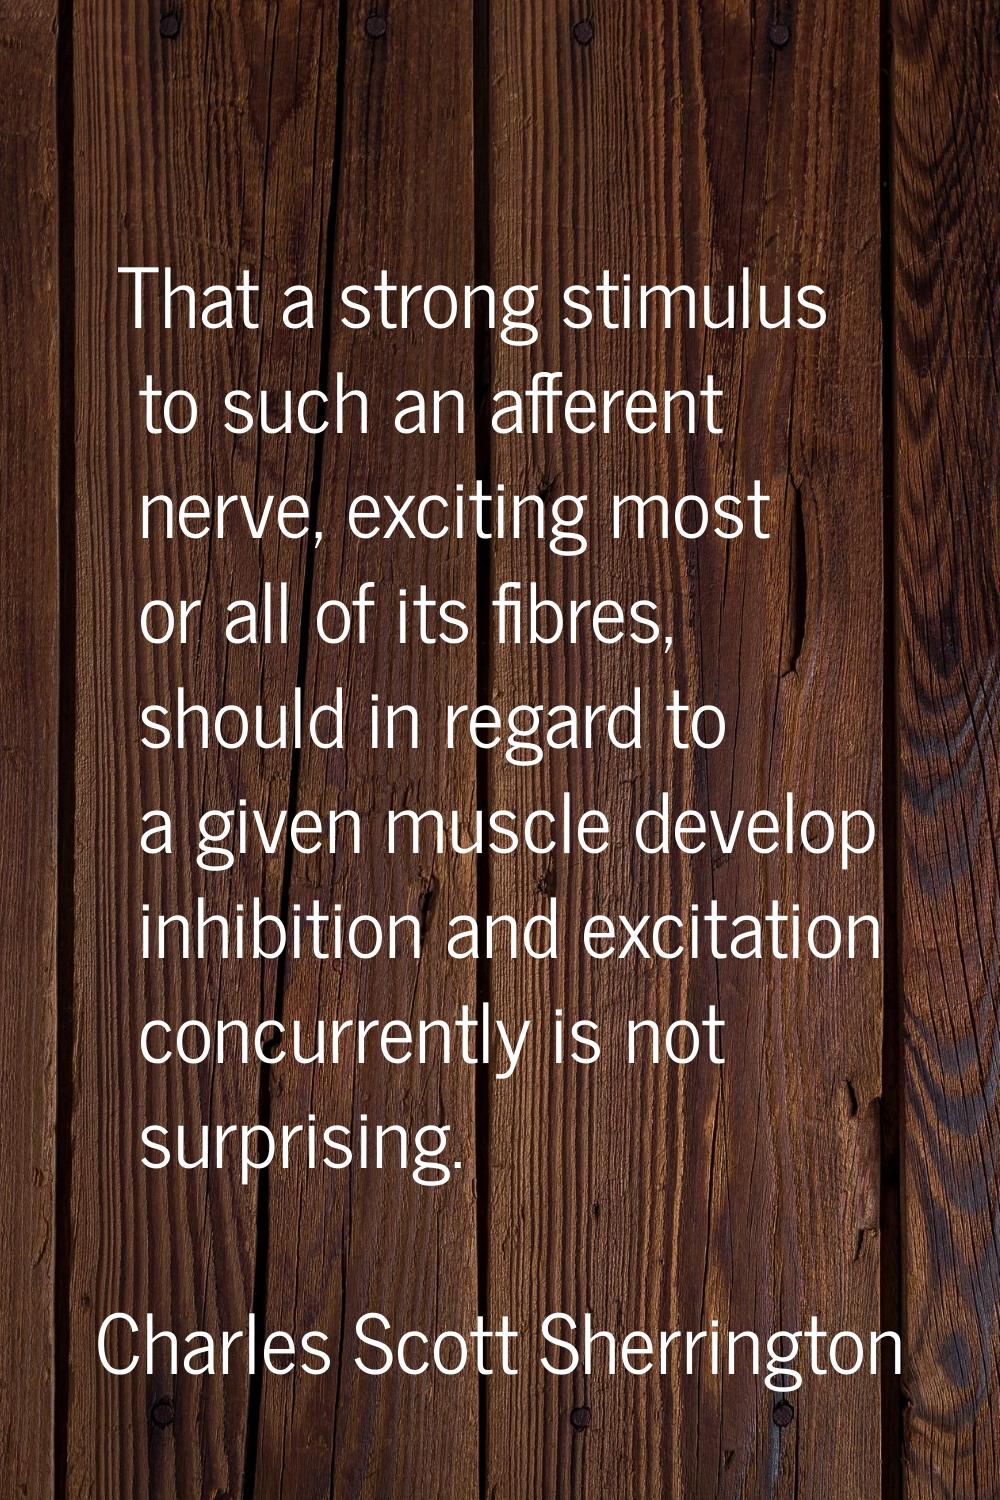 That a strong stimulus to such an afferent nerve, exciting most or all of its fibres, should in reg